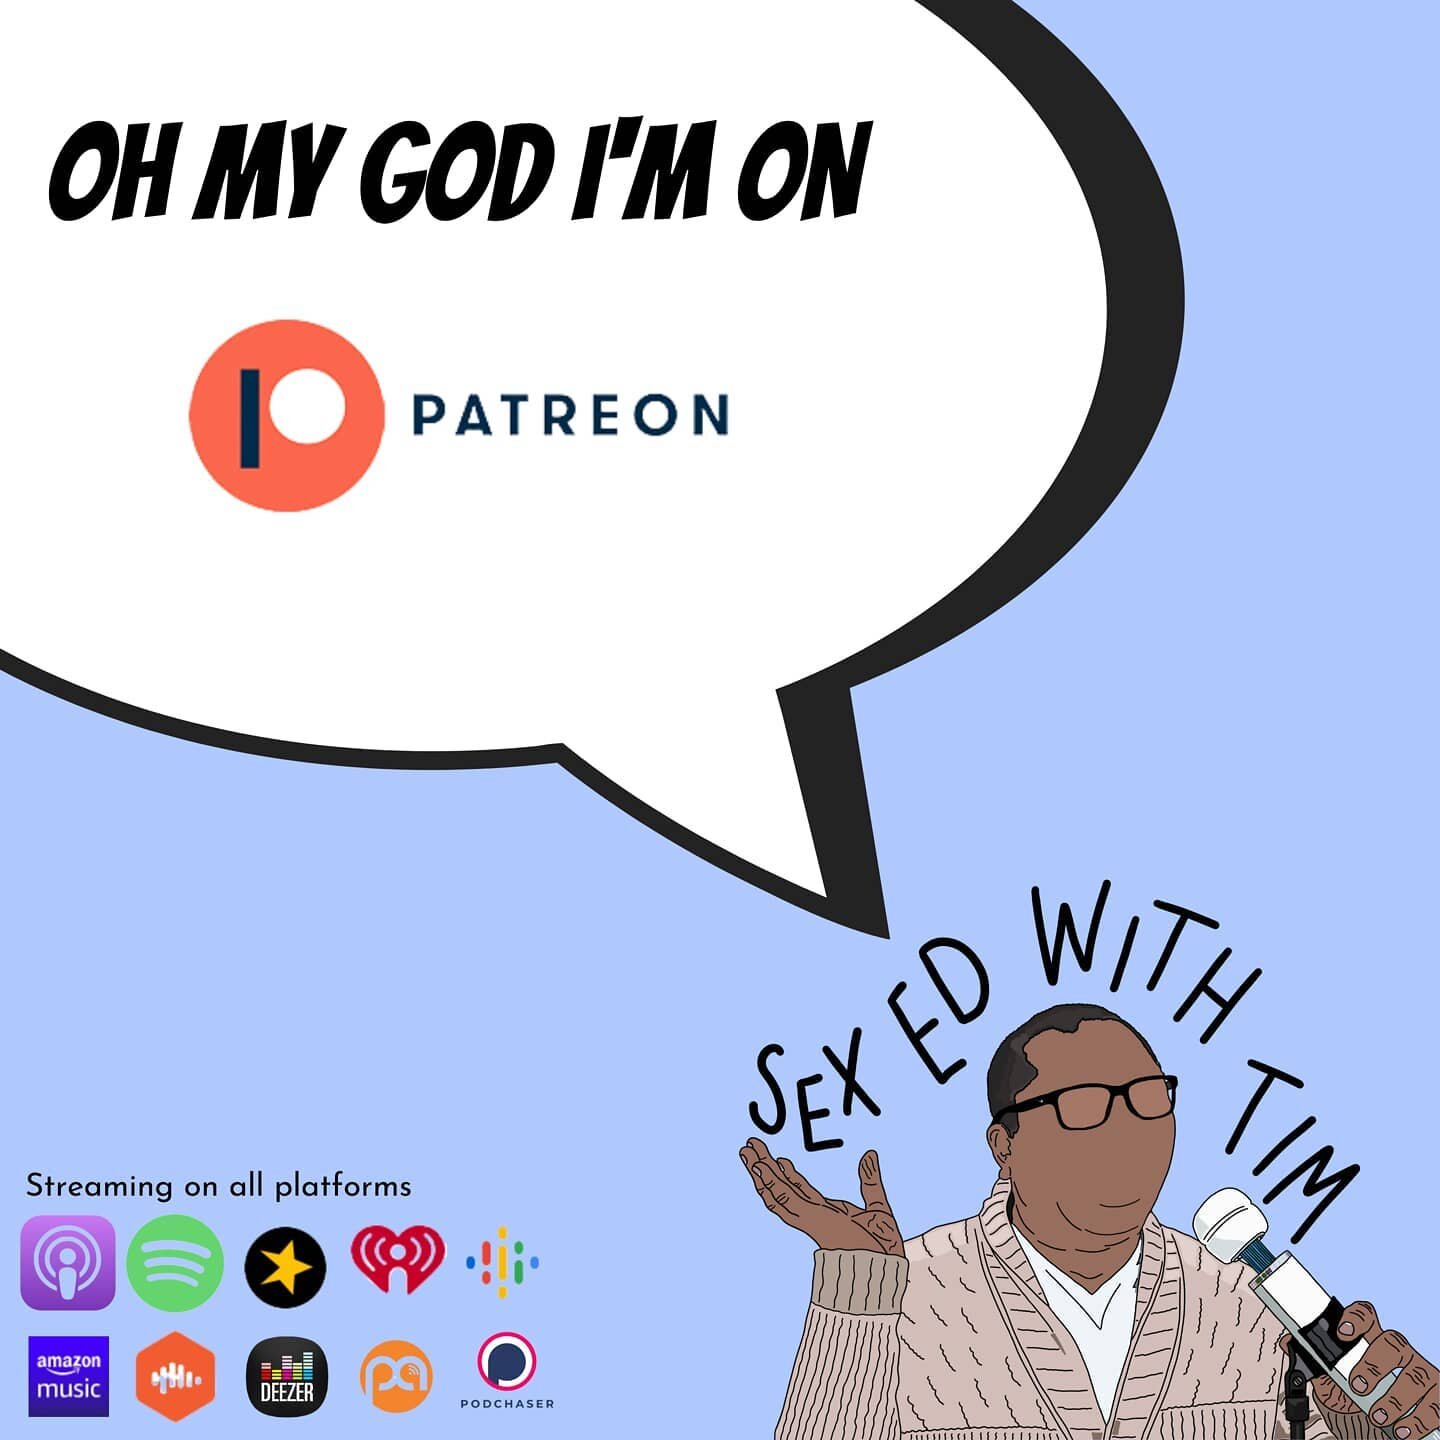 I'M ON PATREON! 
🍆
I can't thank you all enough for all the support you've shown me. Through this sex education business, I've connected with some of the most wonderful people ever. And I hope to continue doing that and giving you the content you wa